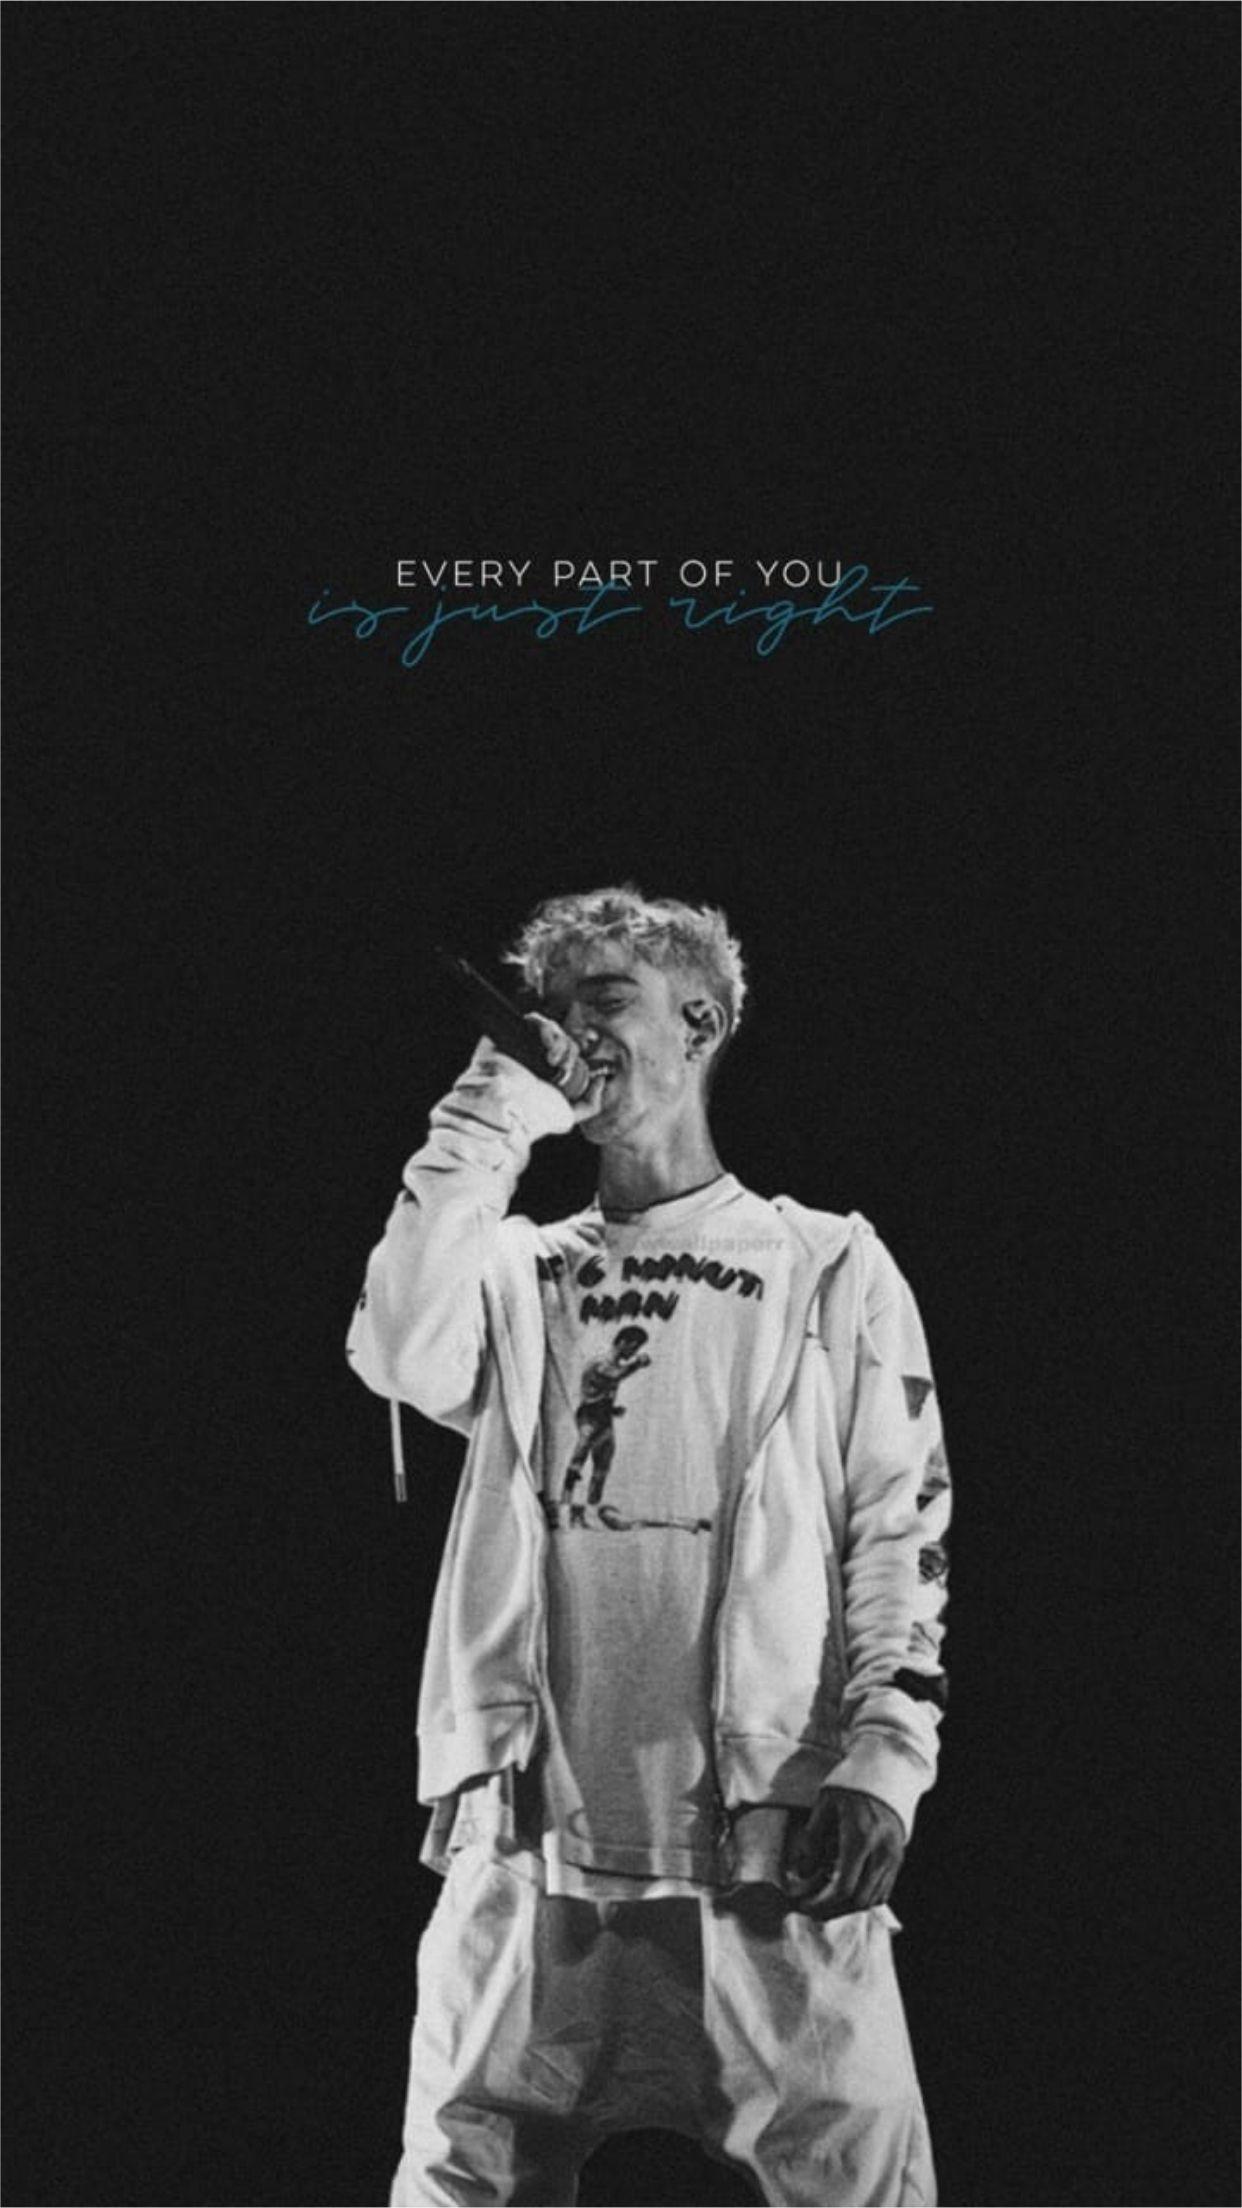 Daniel Seavey wallpaper Don't change wallpaper Why don't we wallpaper. This is us quotes, To my future husband, Chill quotes